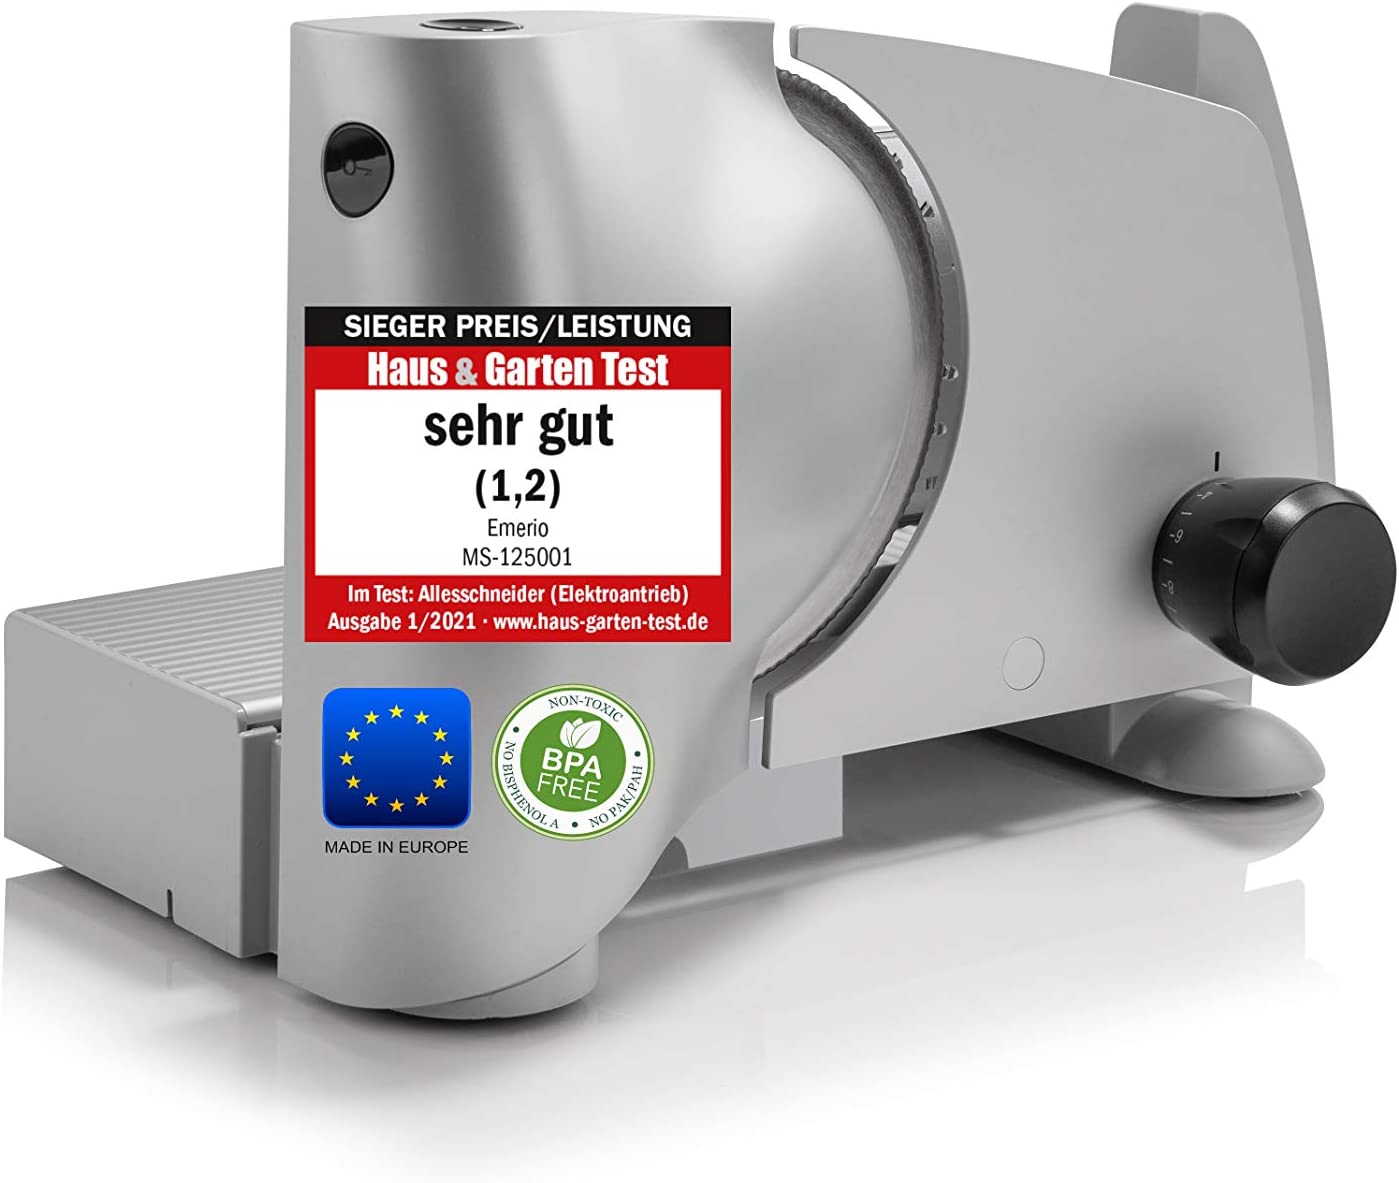 Emerio MS-125001 All-Purpose Cutter Made in the EU Stainless Steel Universal Knife Unit Produced in Germany, Adjustable 0-15 mm, BPA-Free, Metal Housing, with Safety Switch, Eco 110 Watt, Silver